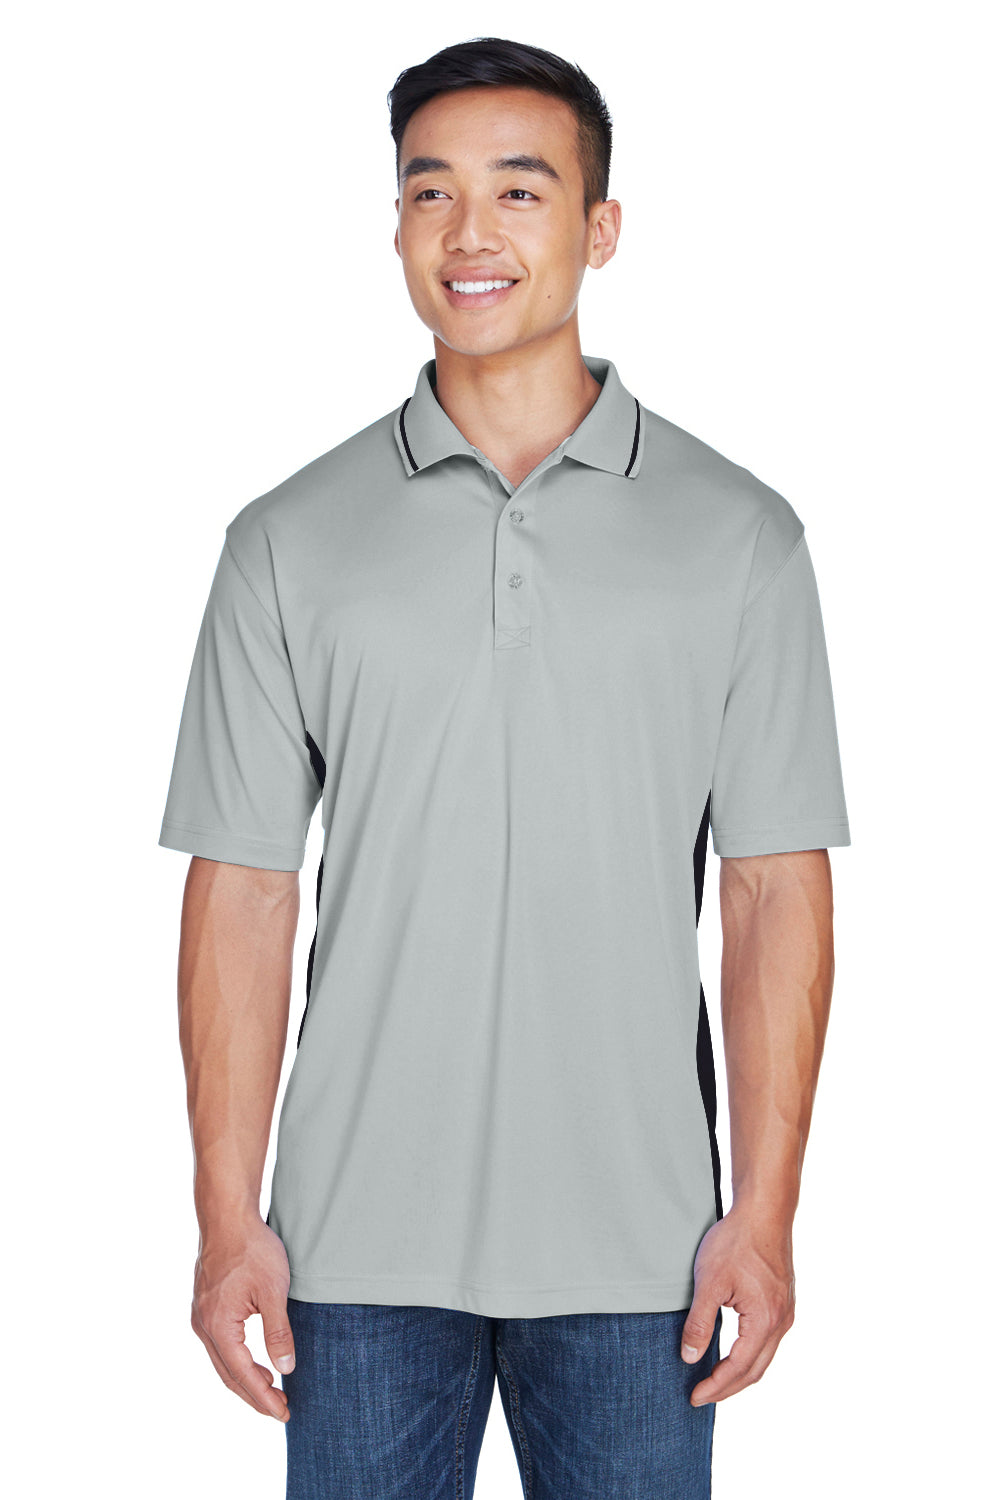 UltraClub 8406 Mens Cool & Dry Moisture Wicking Short Sleeve Polo Shirt Grey/Black Front